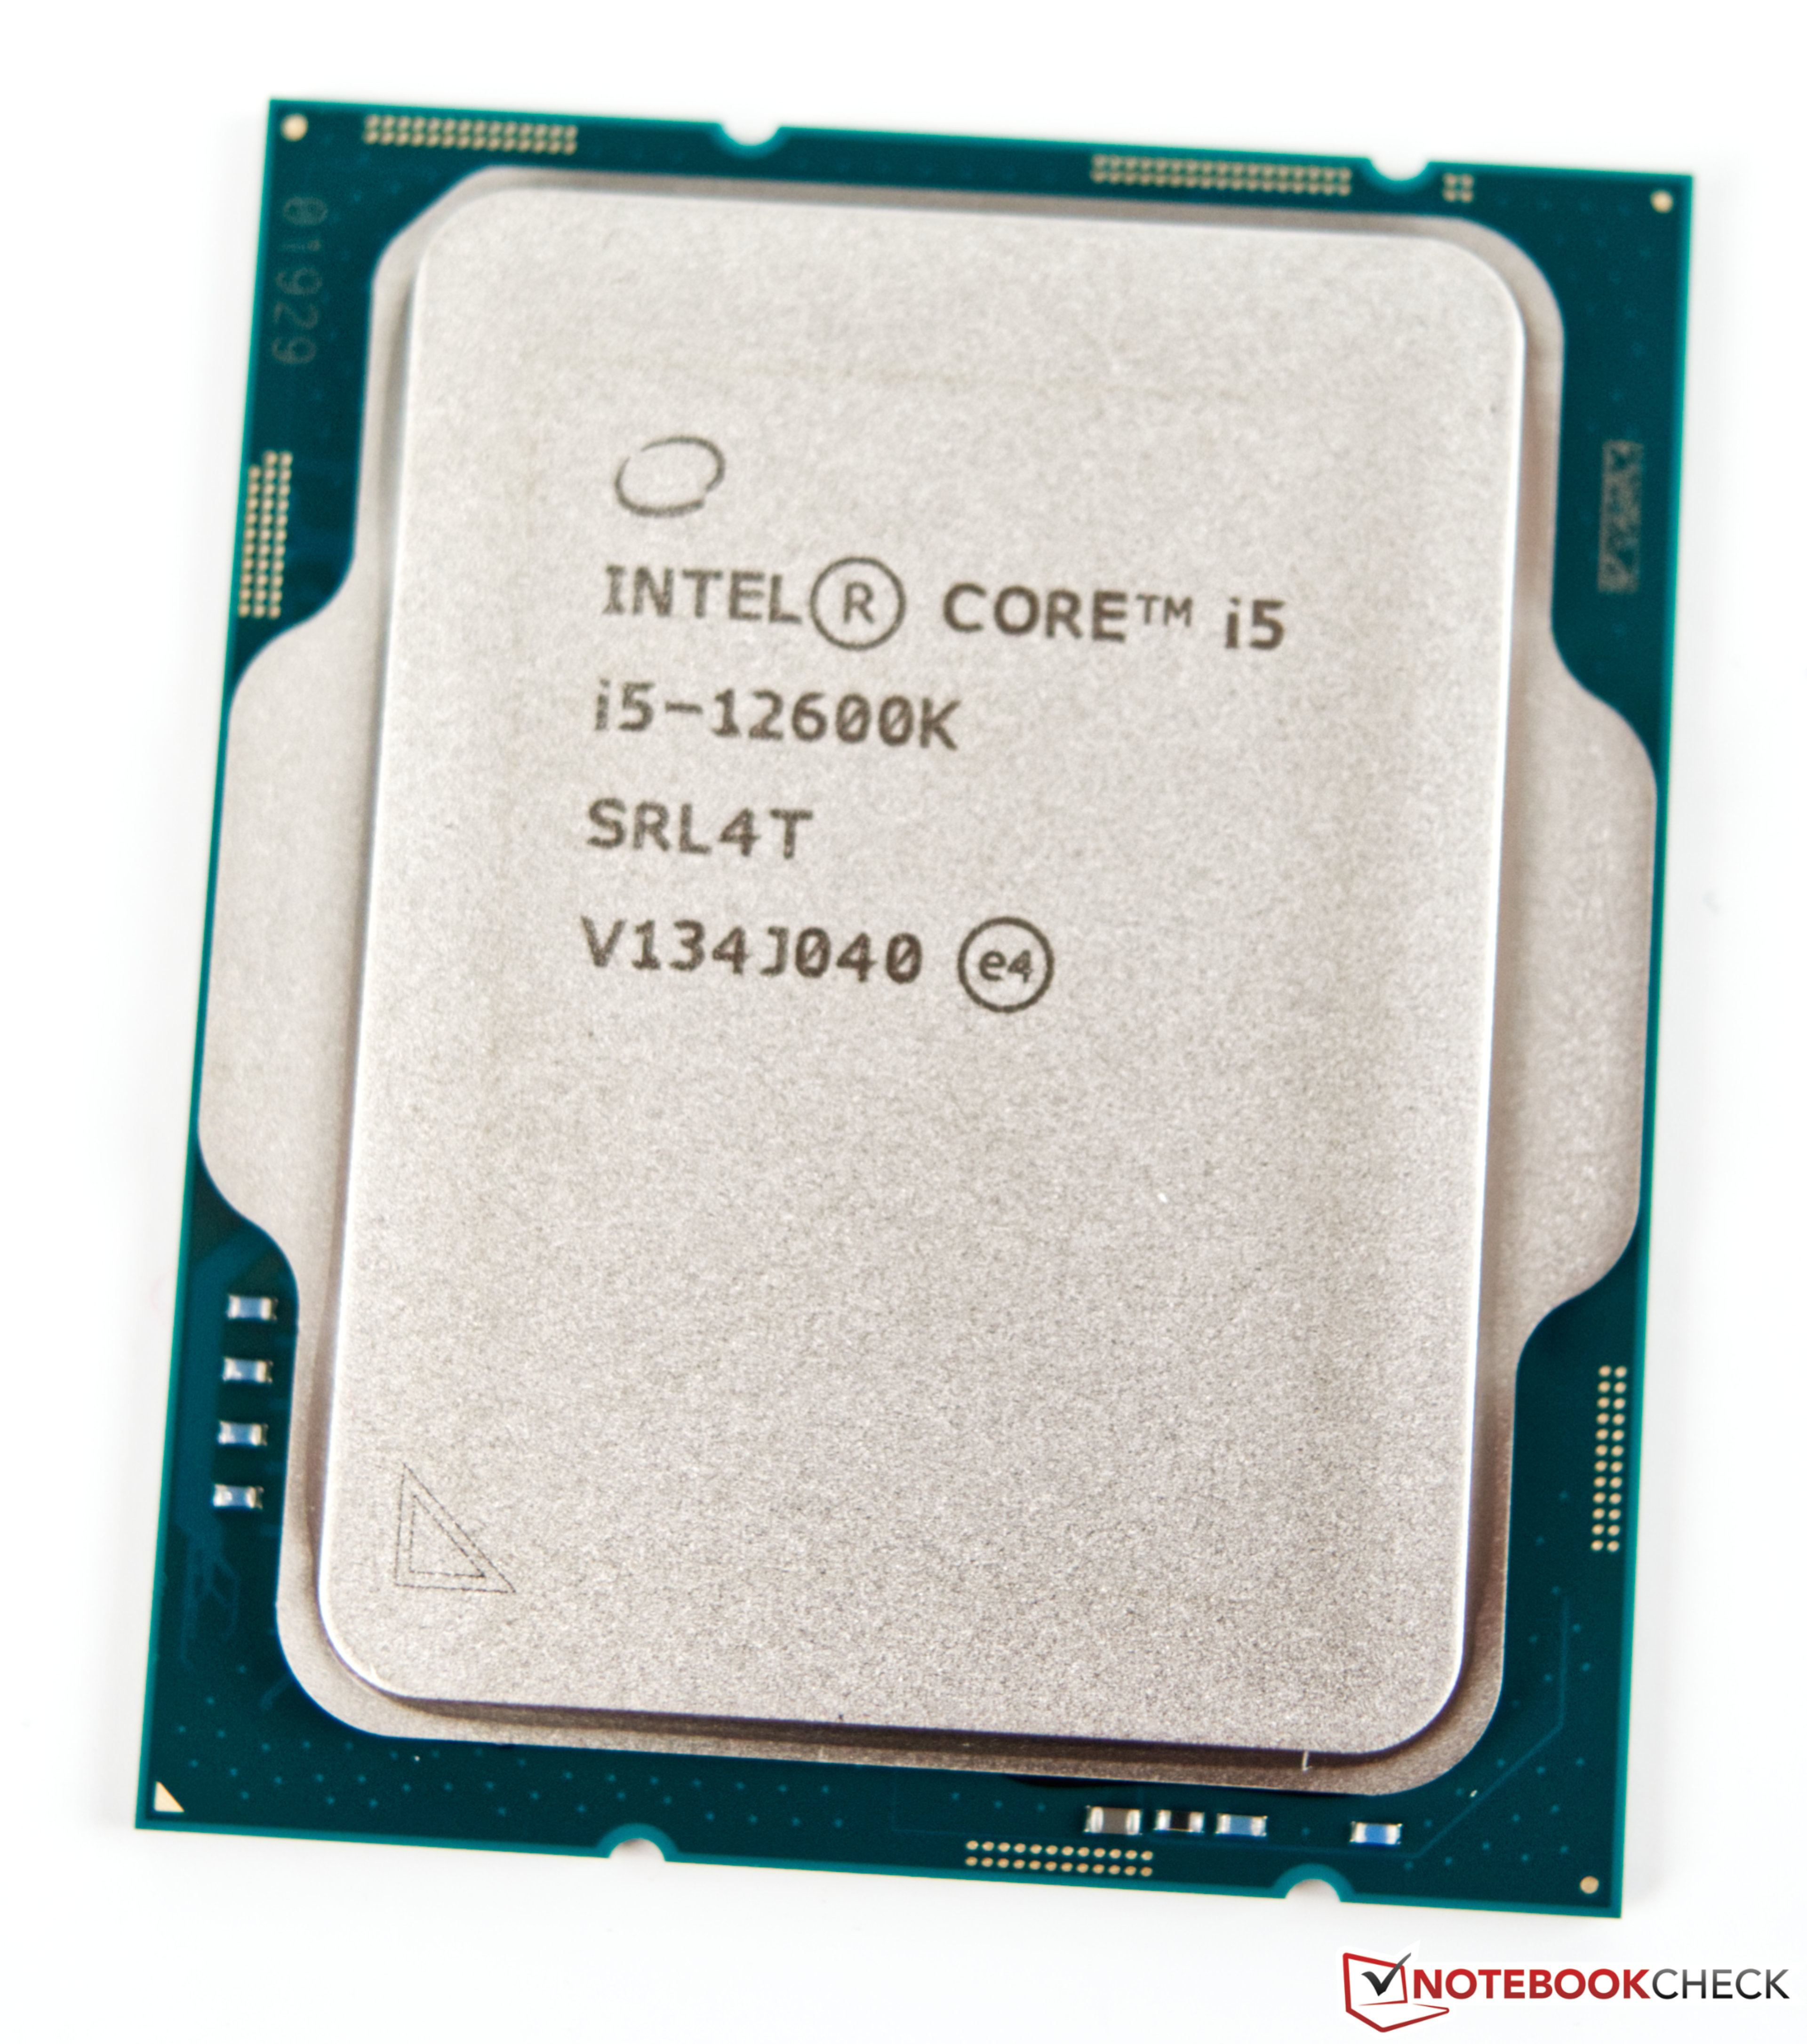 Intel Core i5-12600K Processor - Benchmarks and Specs